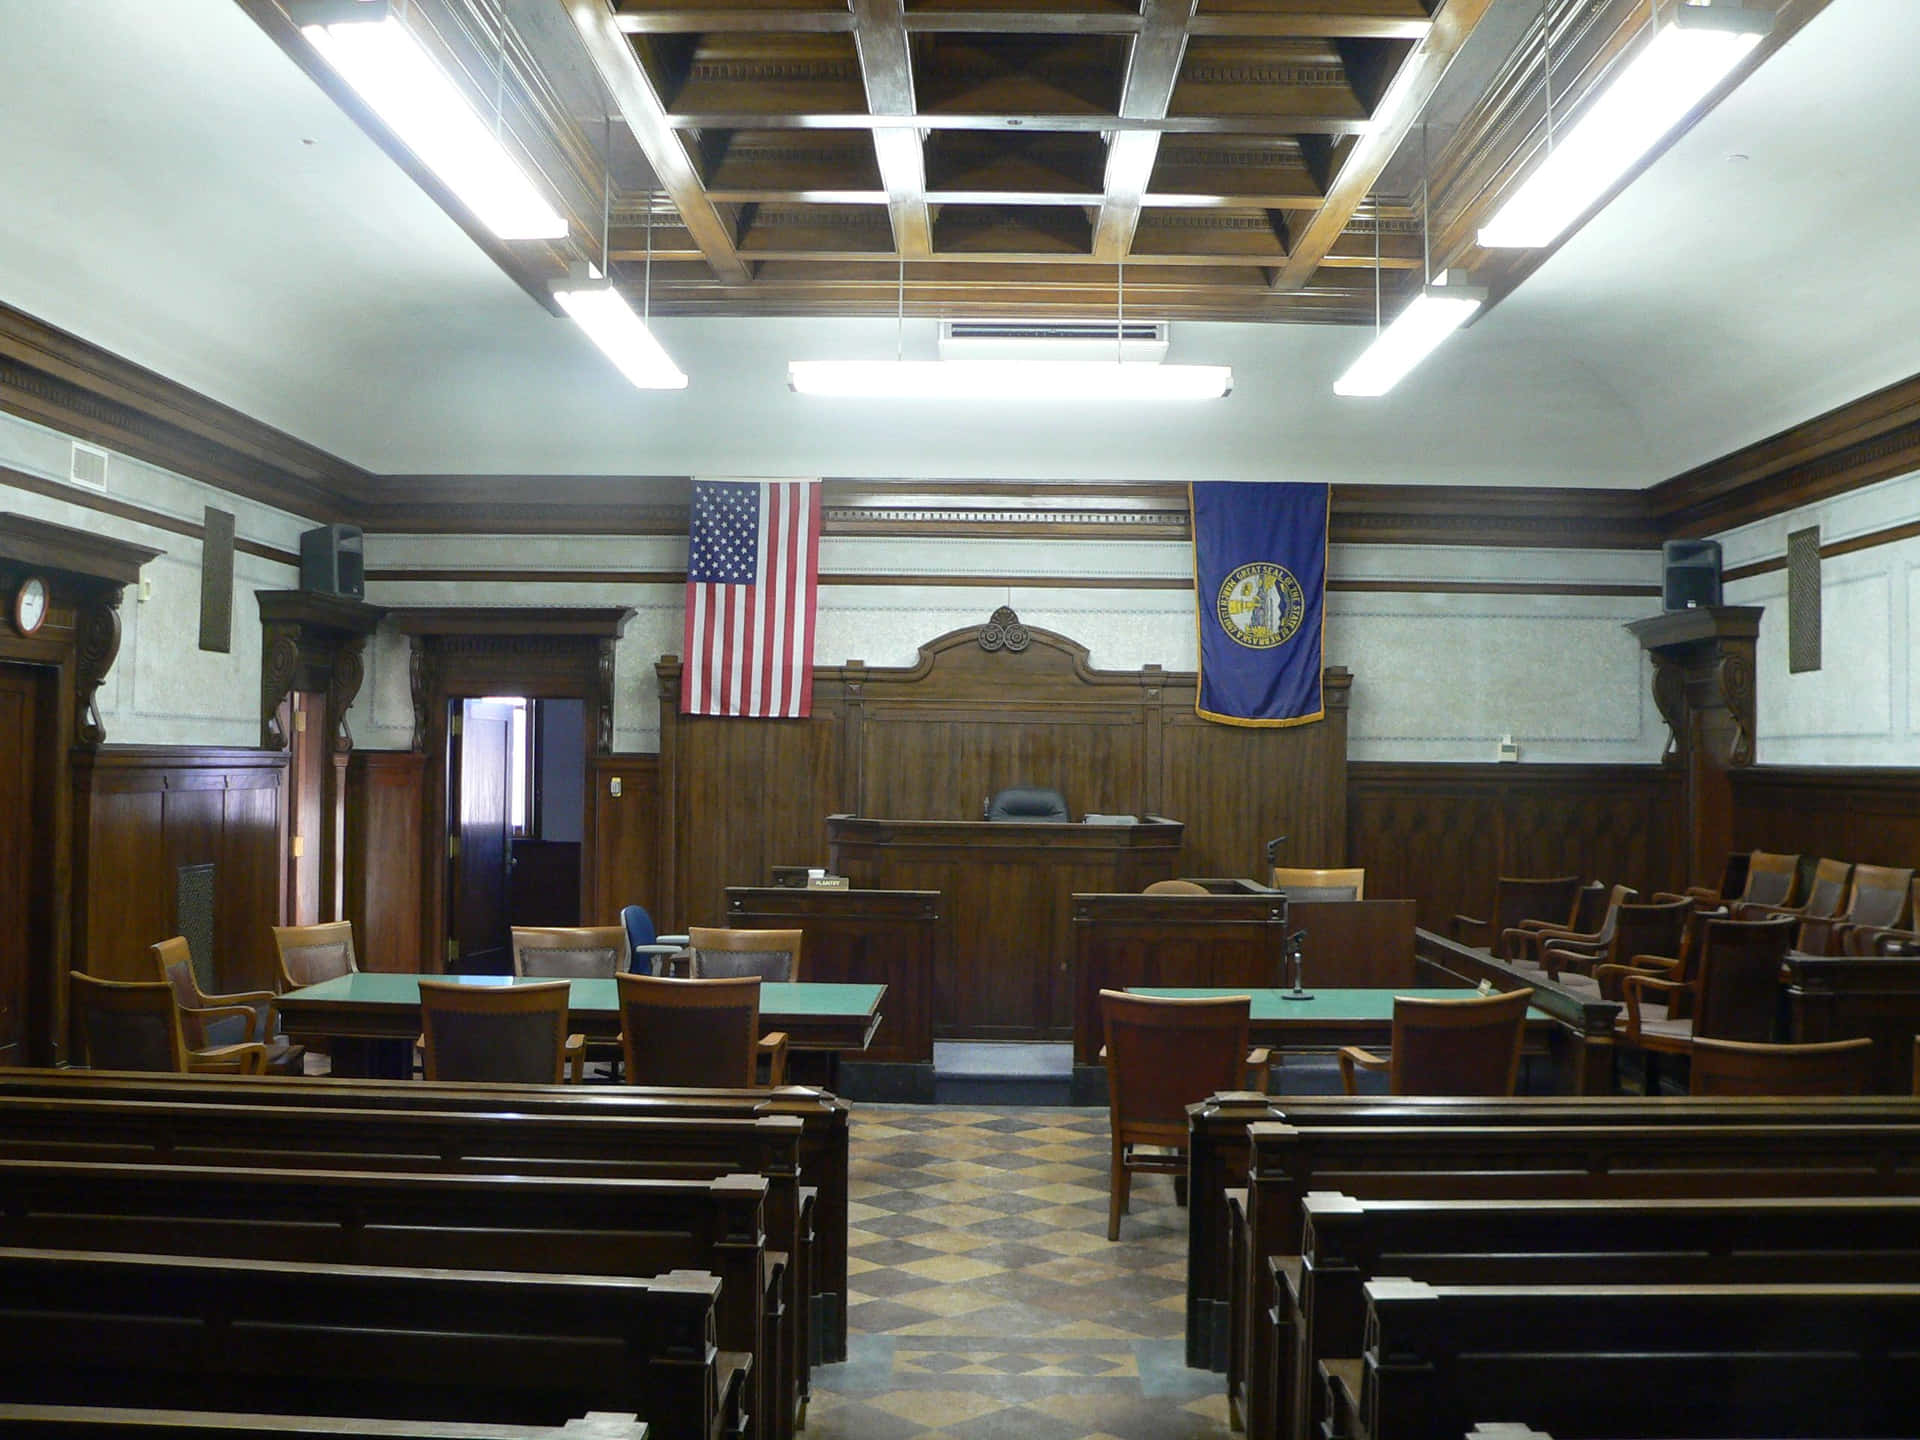 A Courtroom With Wooden Benches